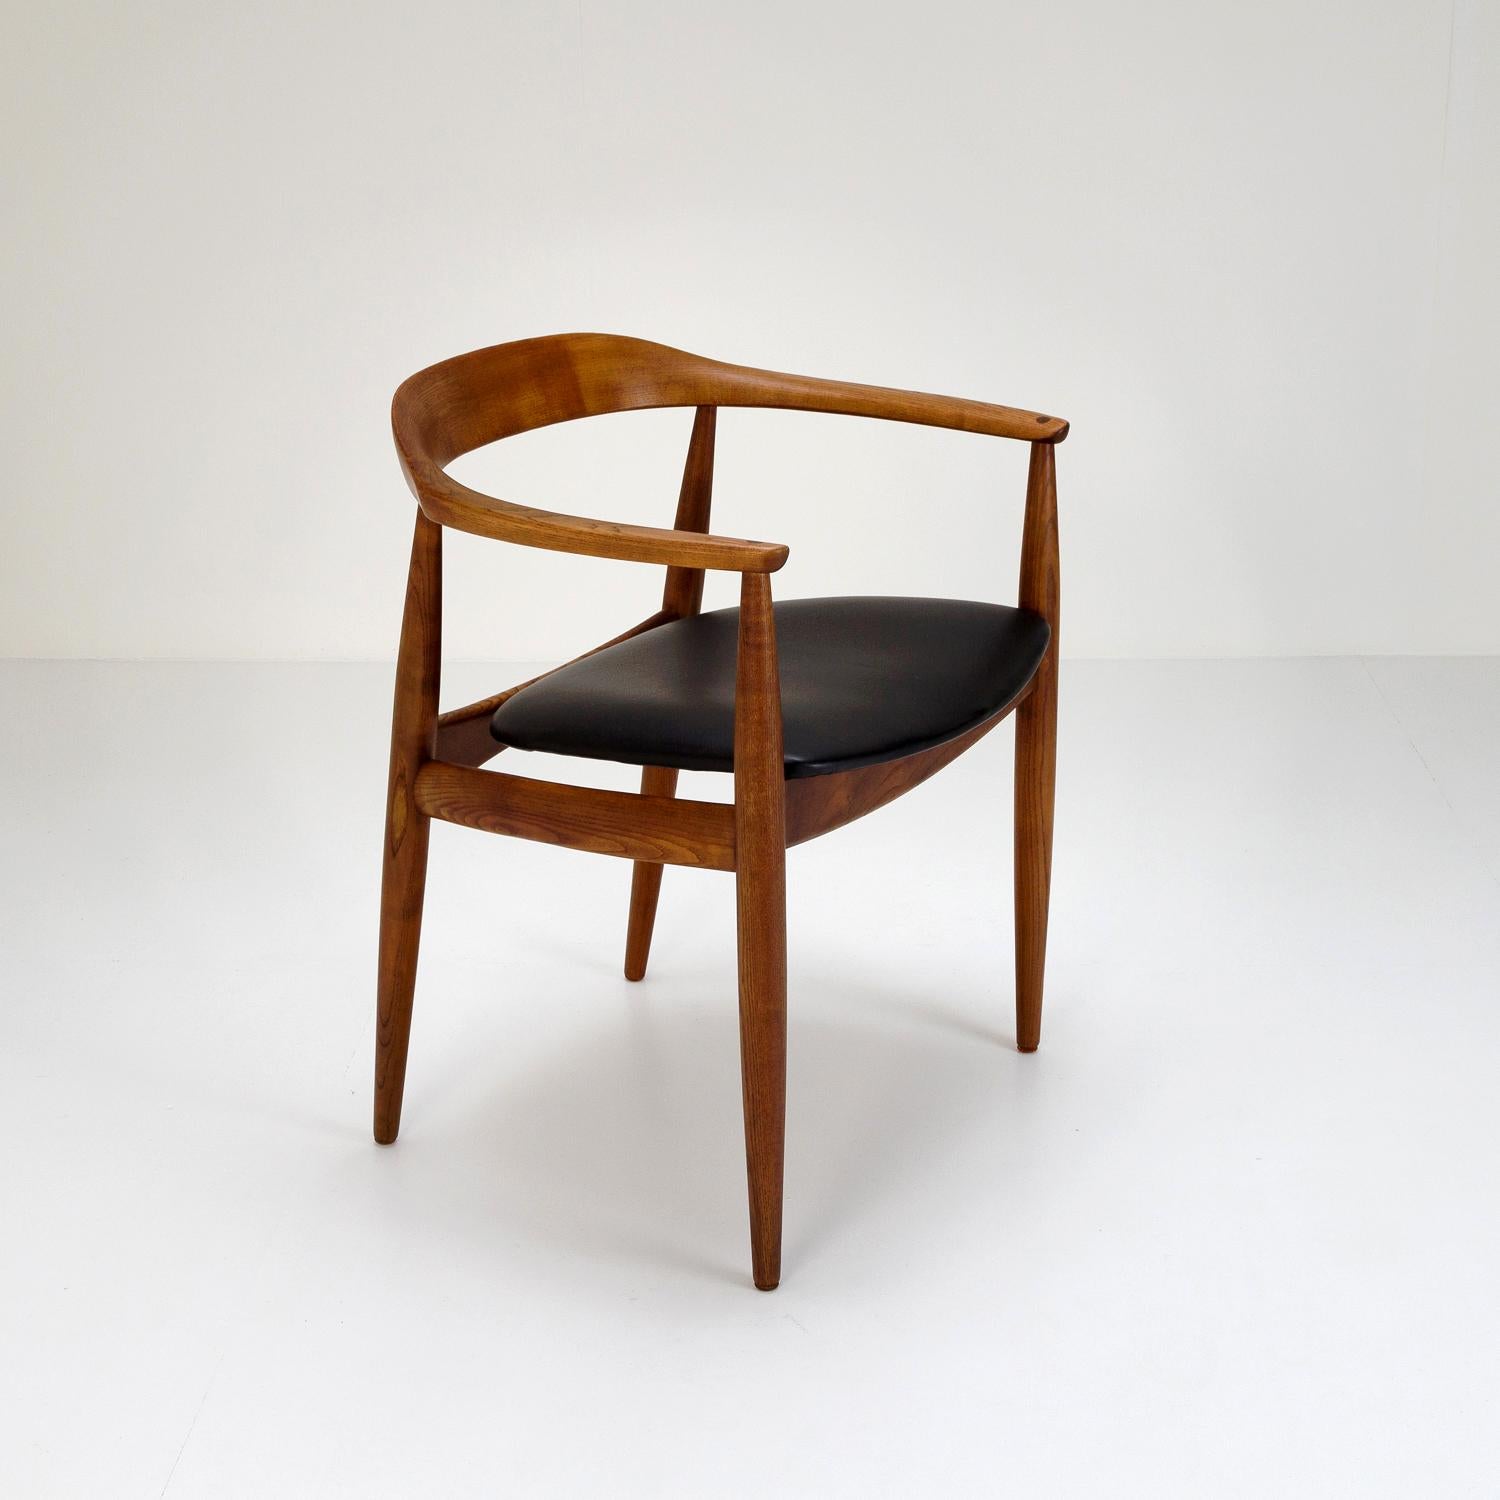 A solid ash desk chair by Illum Wikkelsø for Niels E. Eilersen, Denmark, 1950s with new leather upholstery.

 